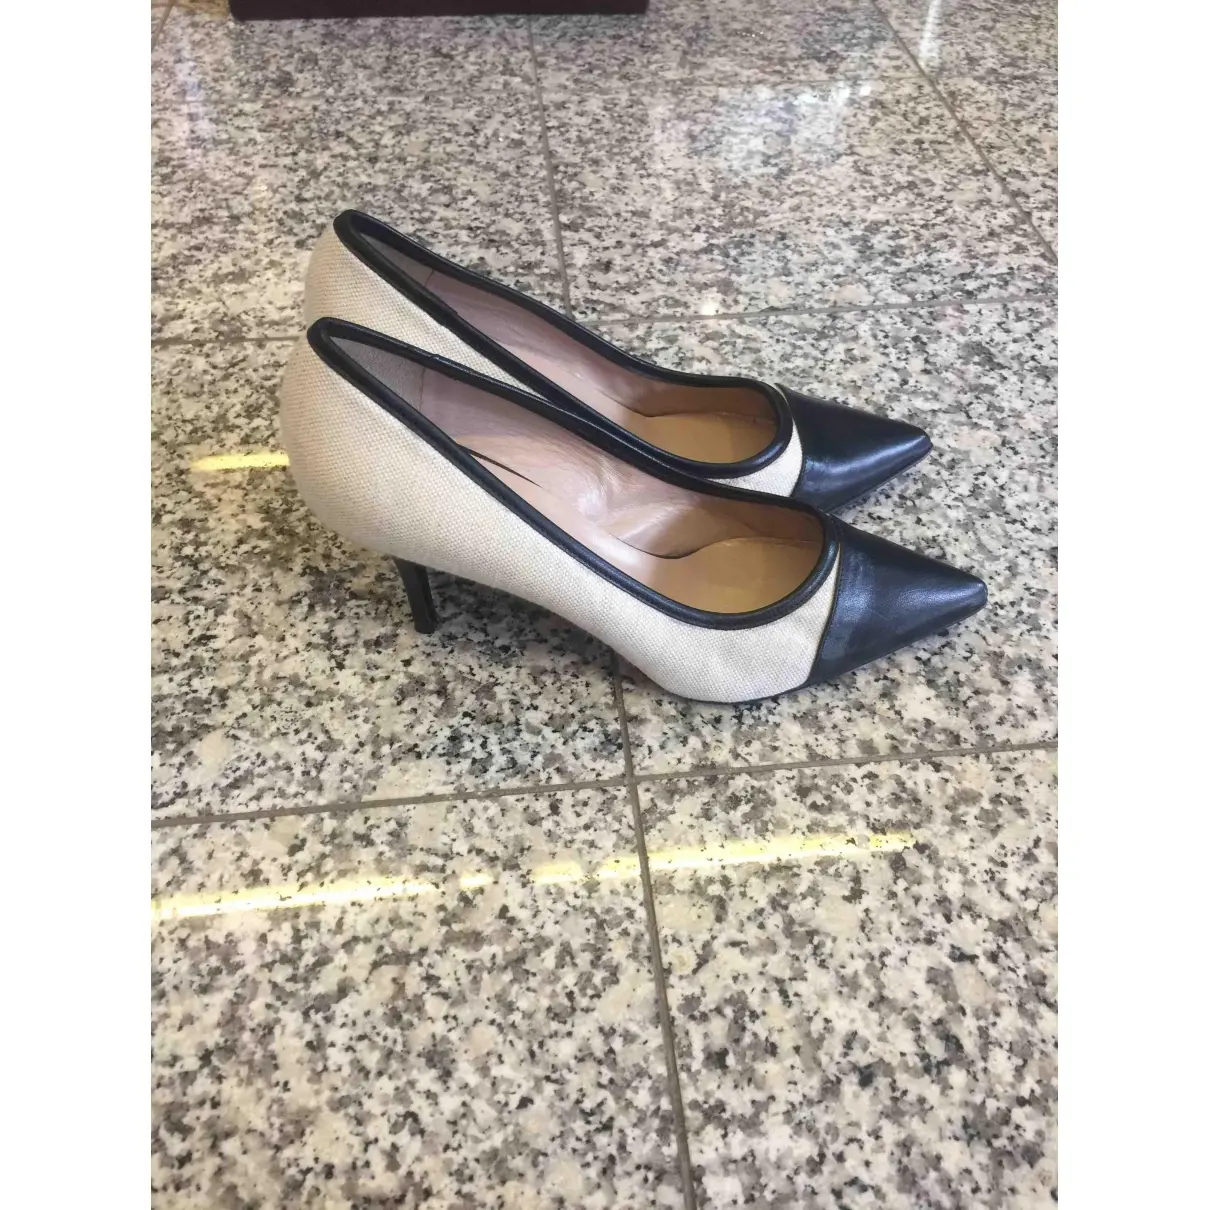 Georges Rech Cloth heels for sale